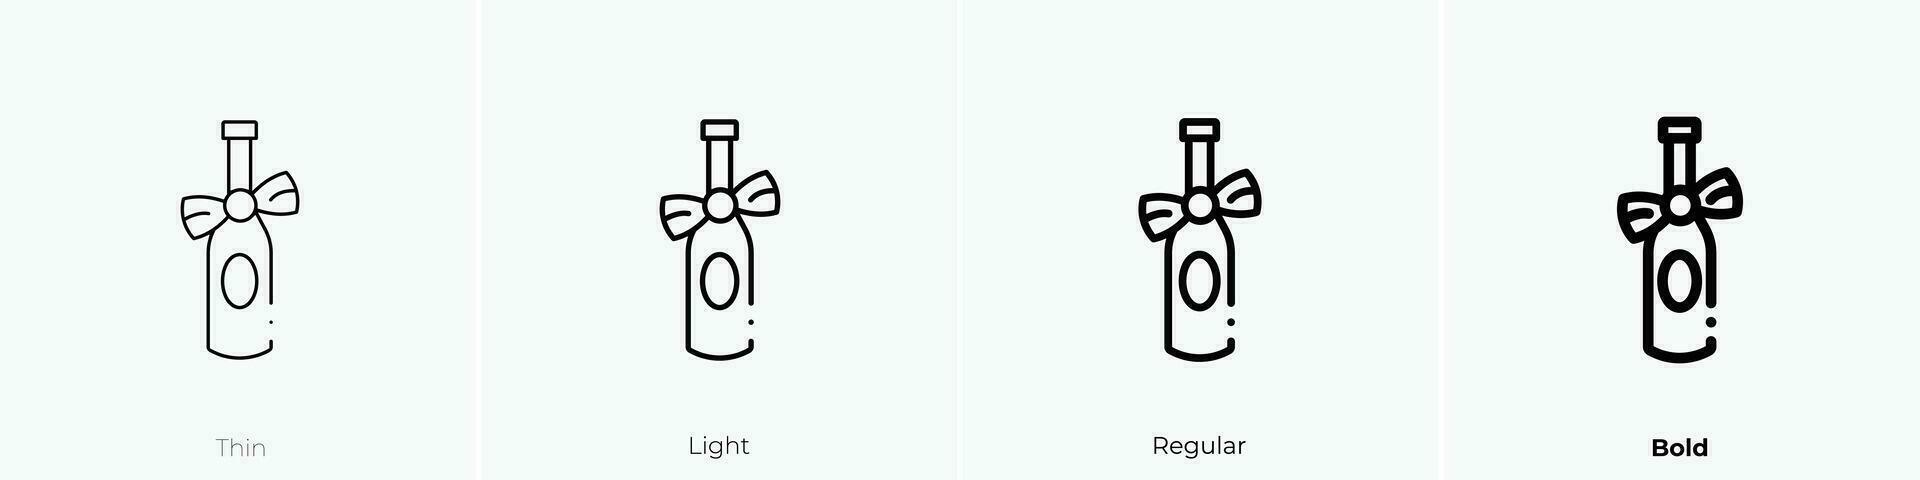 wine icon. Thin, Light, Regular And Bold style design isolated on white background vector